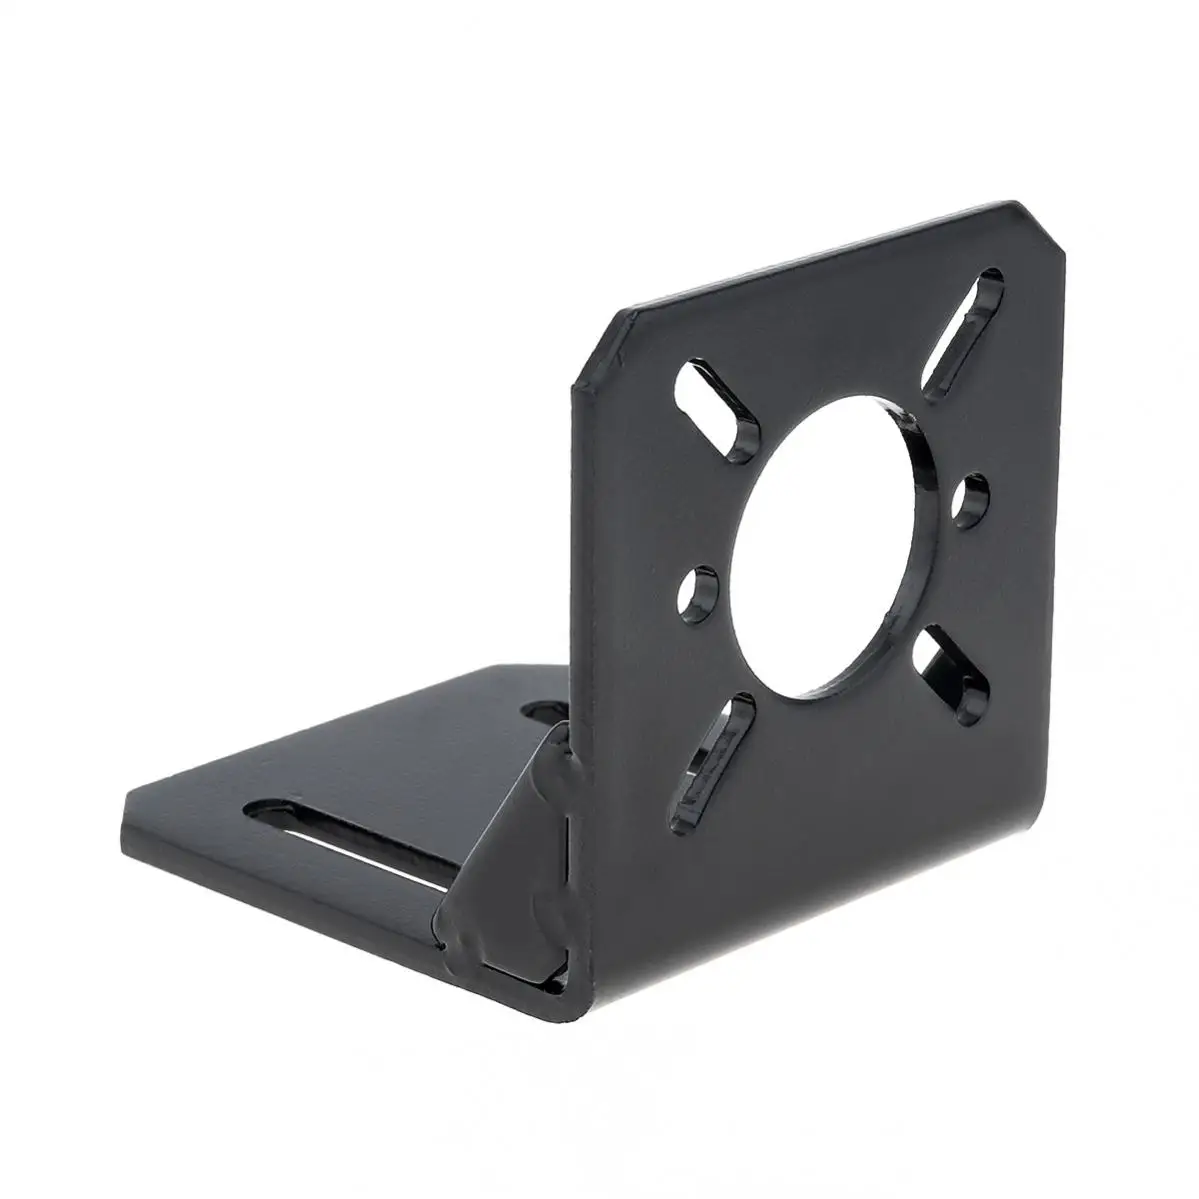 775 Motor Fixed Mounting Base Cutting Machine Clamp Seat Support Bracket #H6Y 